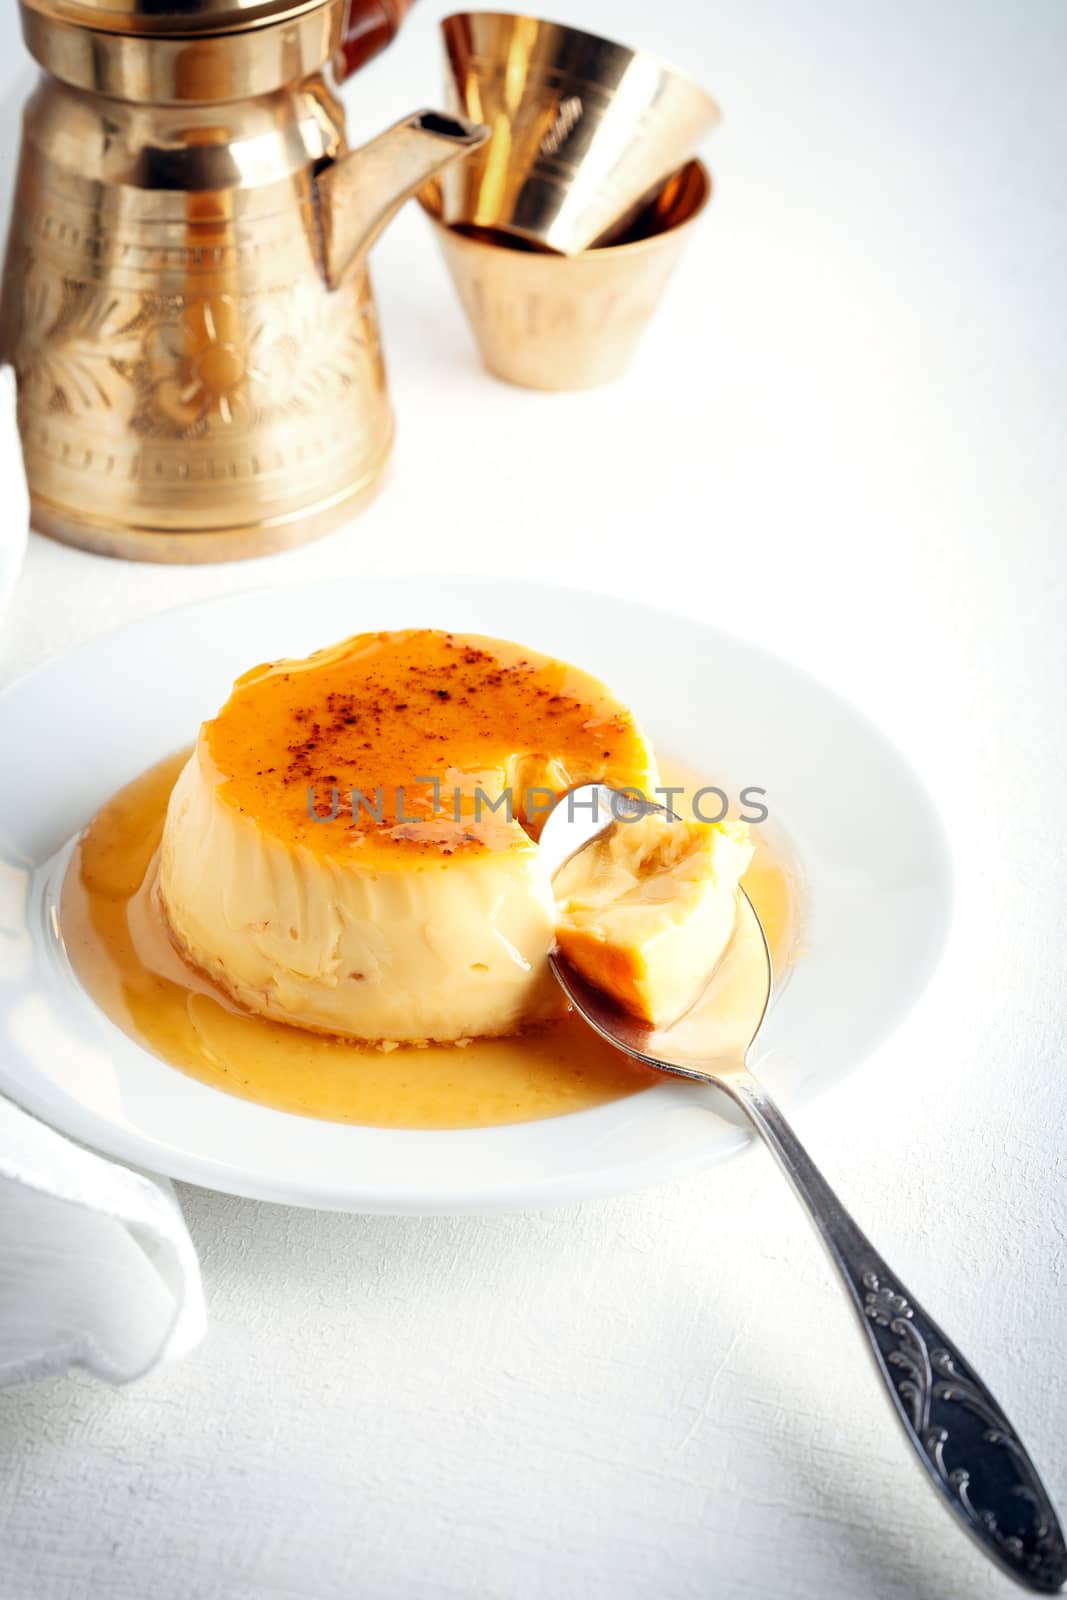 Creme caramel on a plate served on a table.